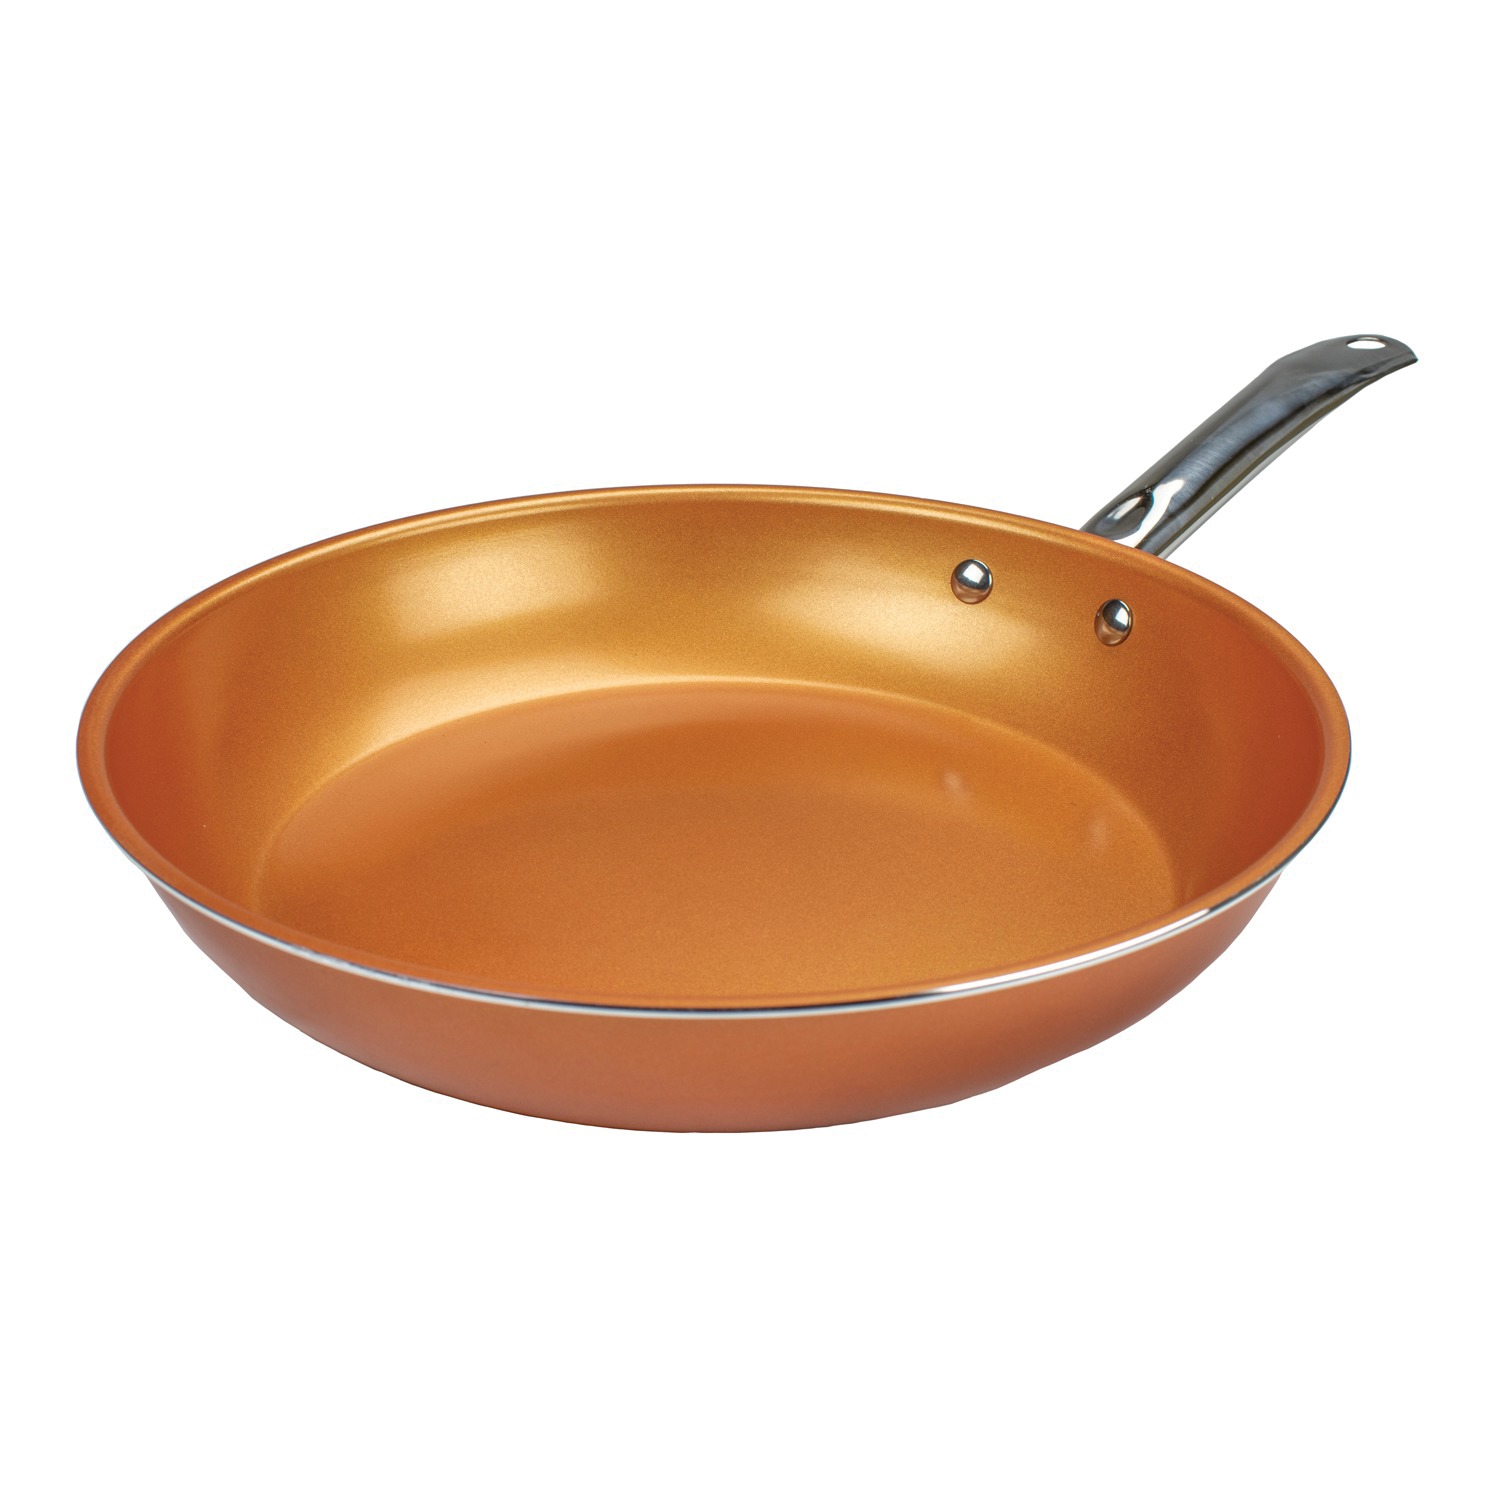 Brentwood Appliances BFP-330C Non-Stick Induction Copper Frying Pan (11.5 Inch)